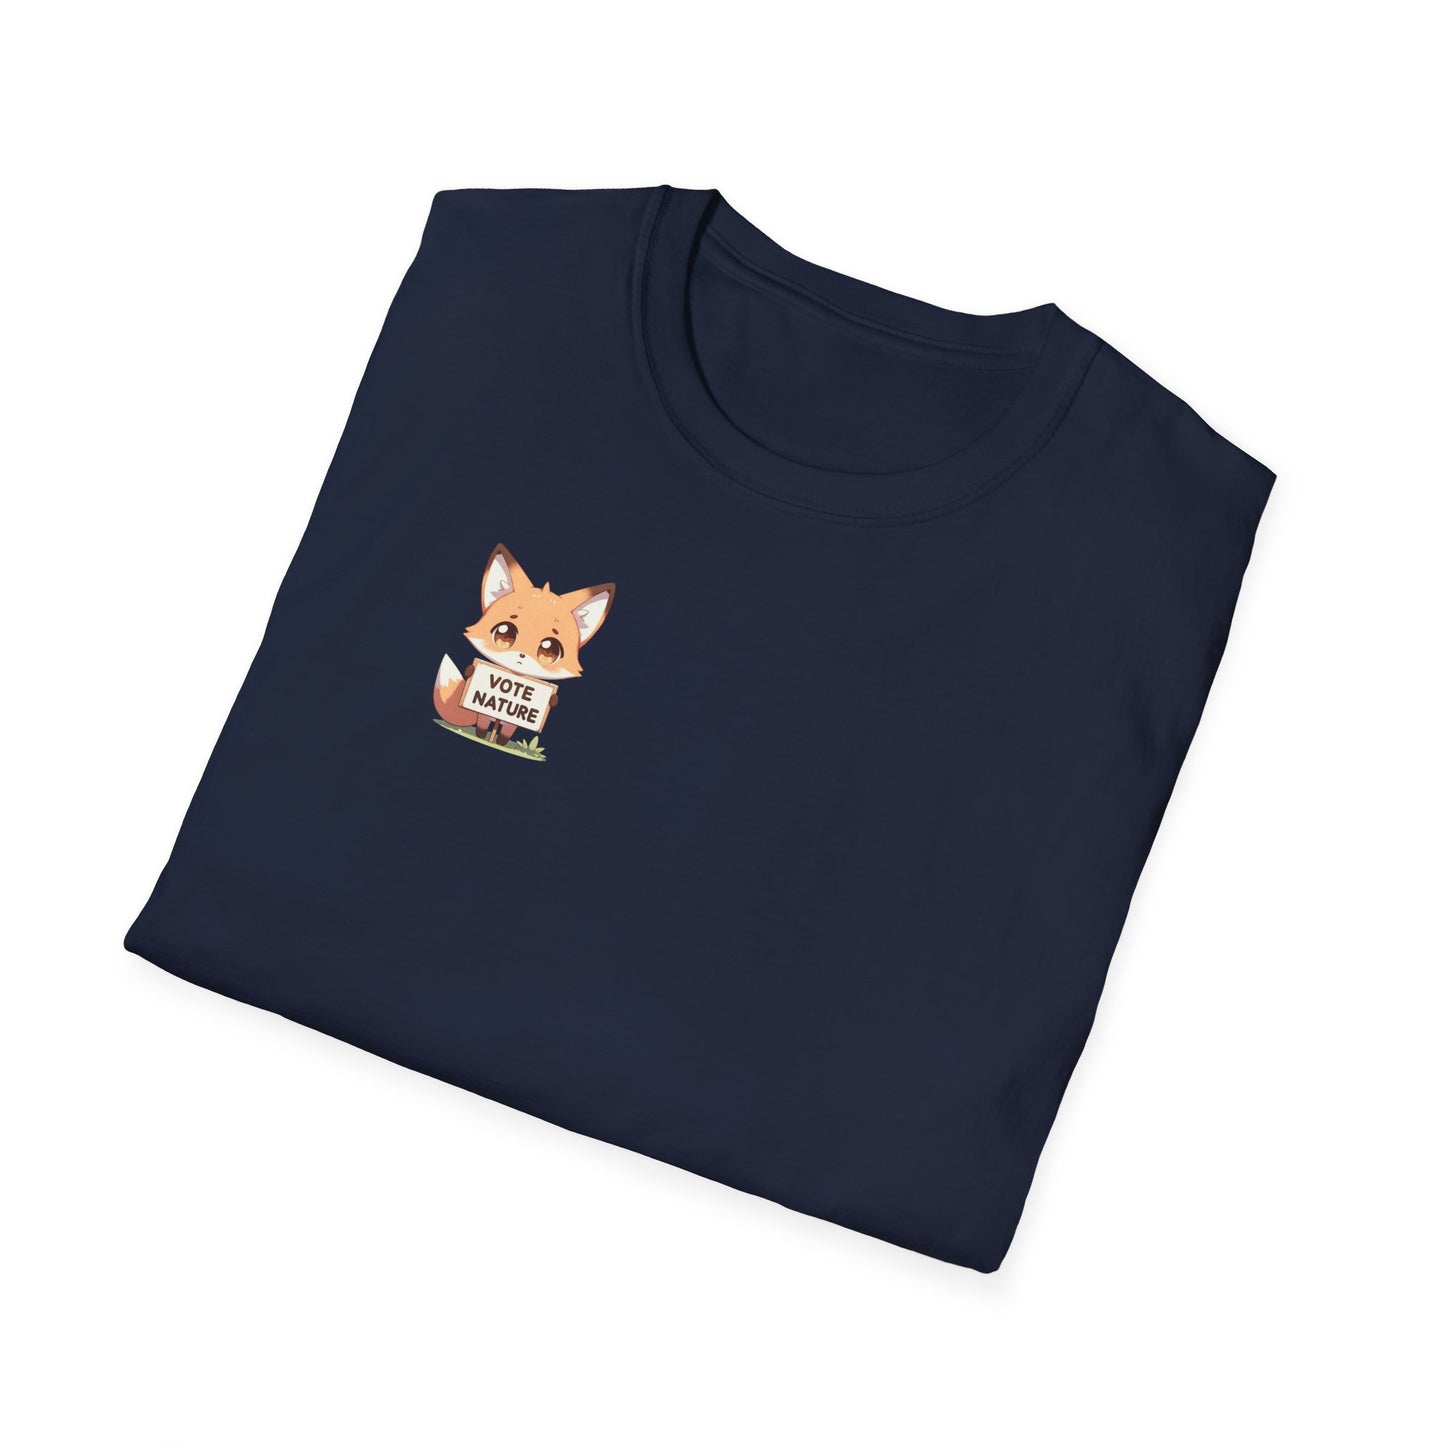 Inspiring Cute Fox Statement Soft Style t-shirt: Vote Nature |unisex| Minimalist Protest, Resistance, Activism, and Strong! Show You Care!